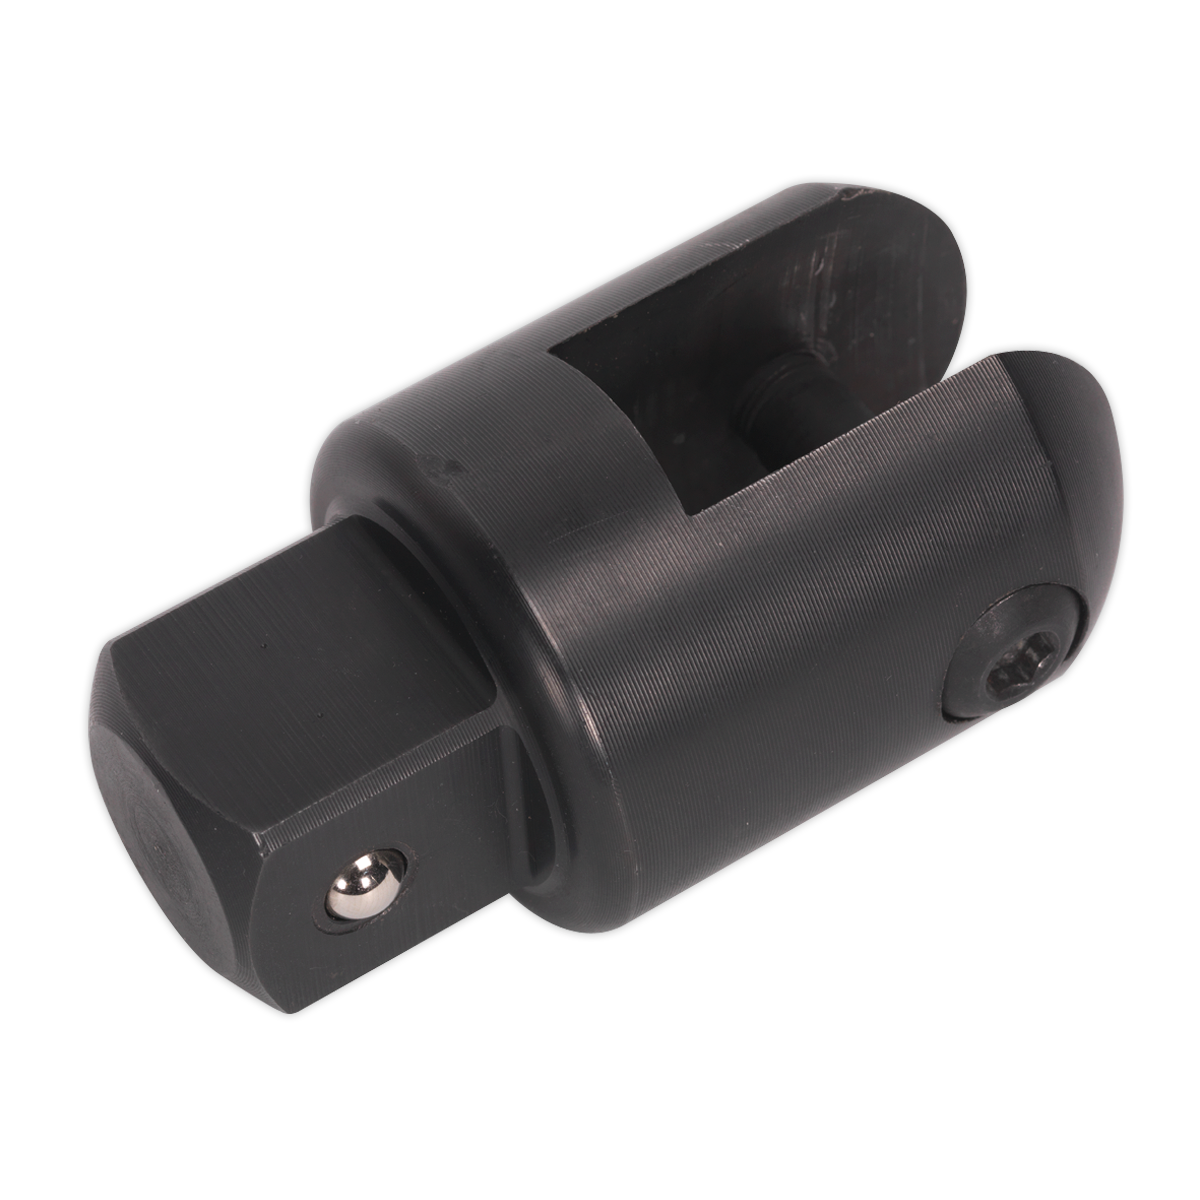 Sealey Knuckle 1"Sq Drive for AK7311